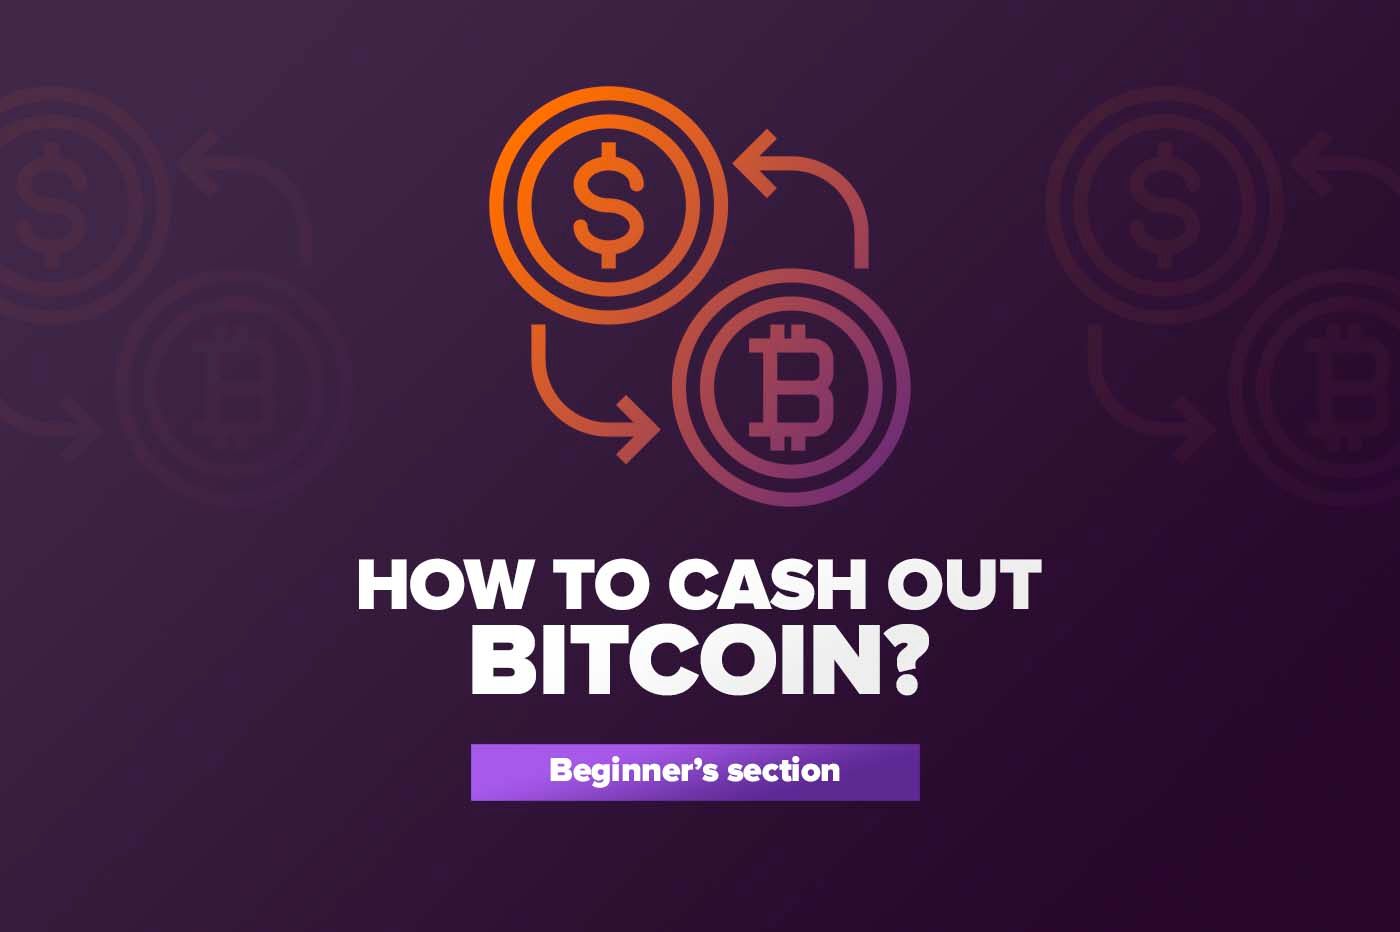 Article How to cash out BTC at Kraken, Coinbase and Poloniex?